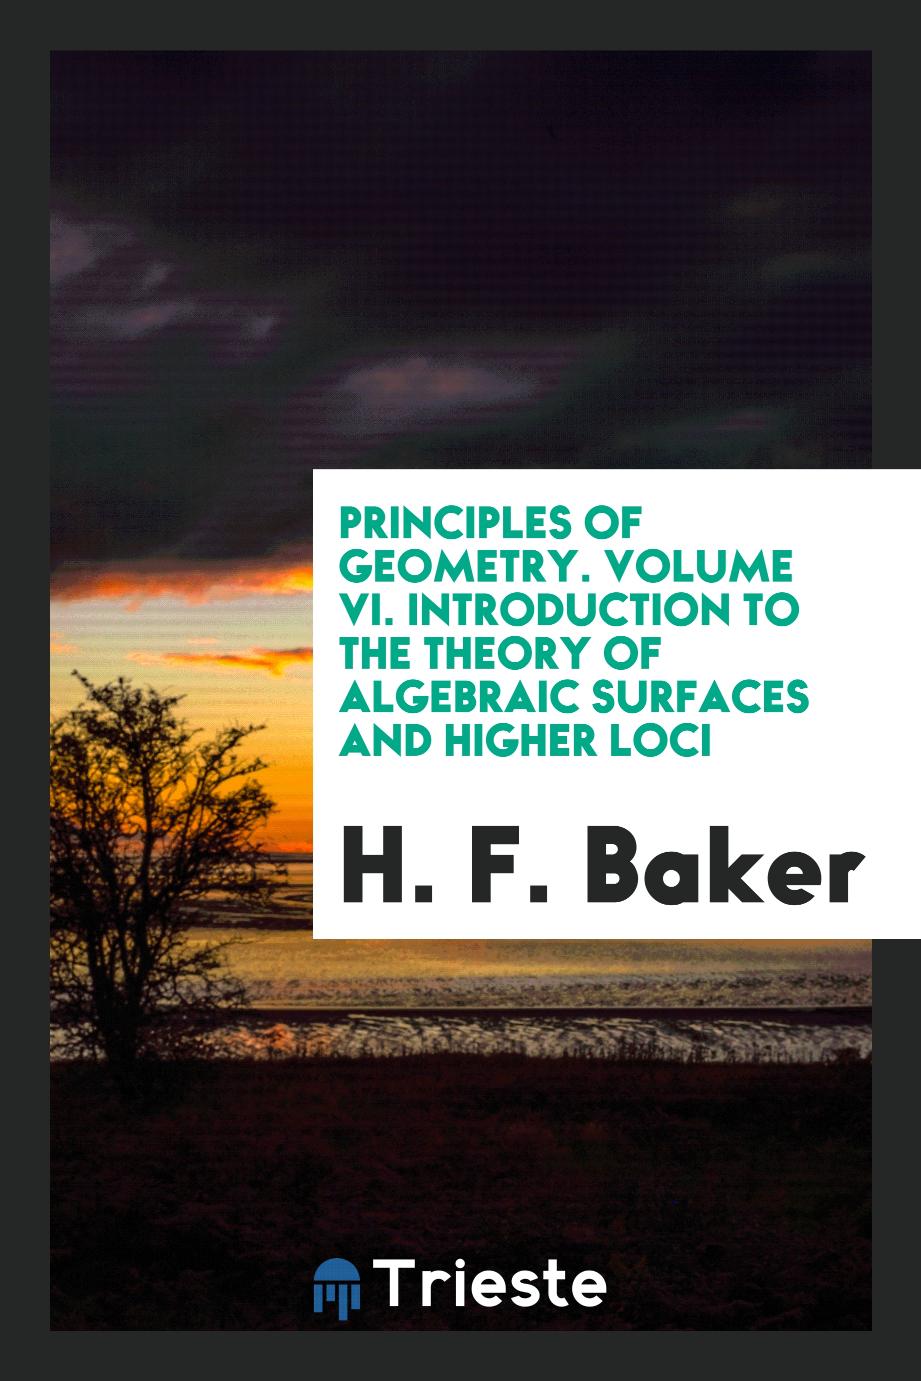 Principles of Geometry. Volume VI. Introduction to the Theory of Algebraic Surfaces and Higher Loci